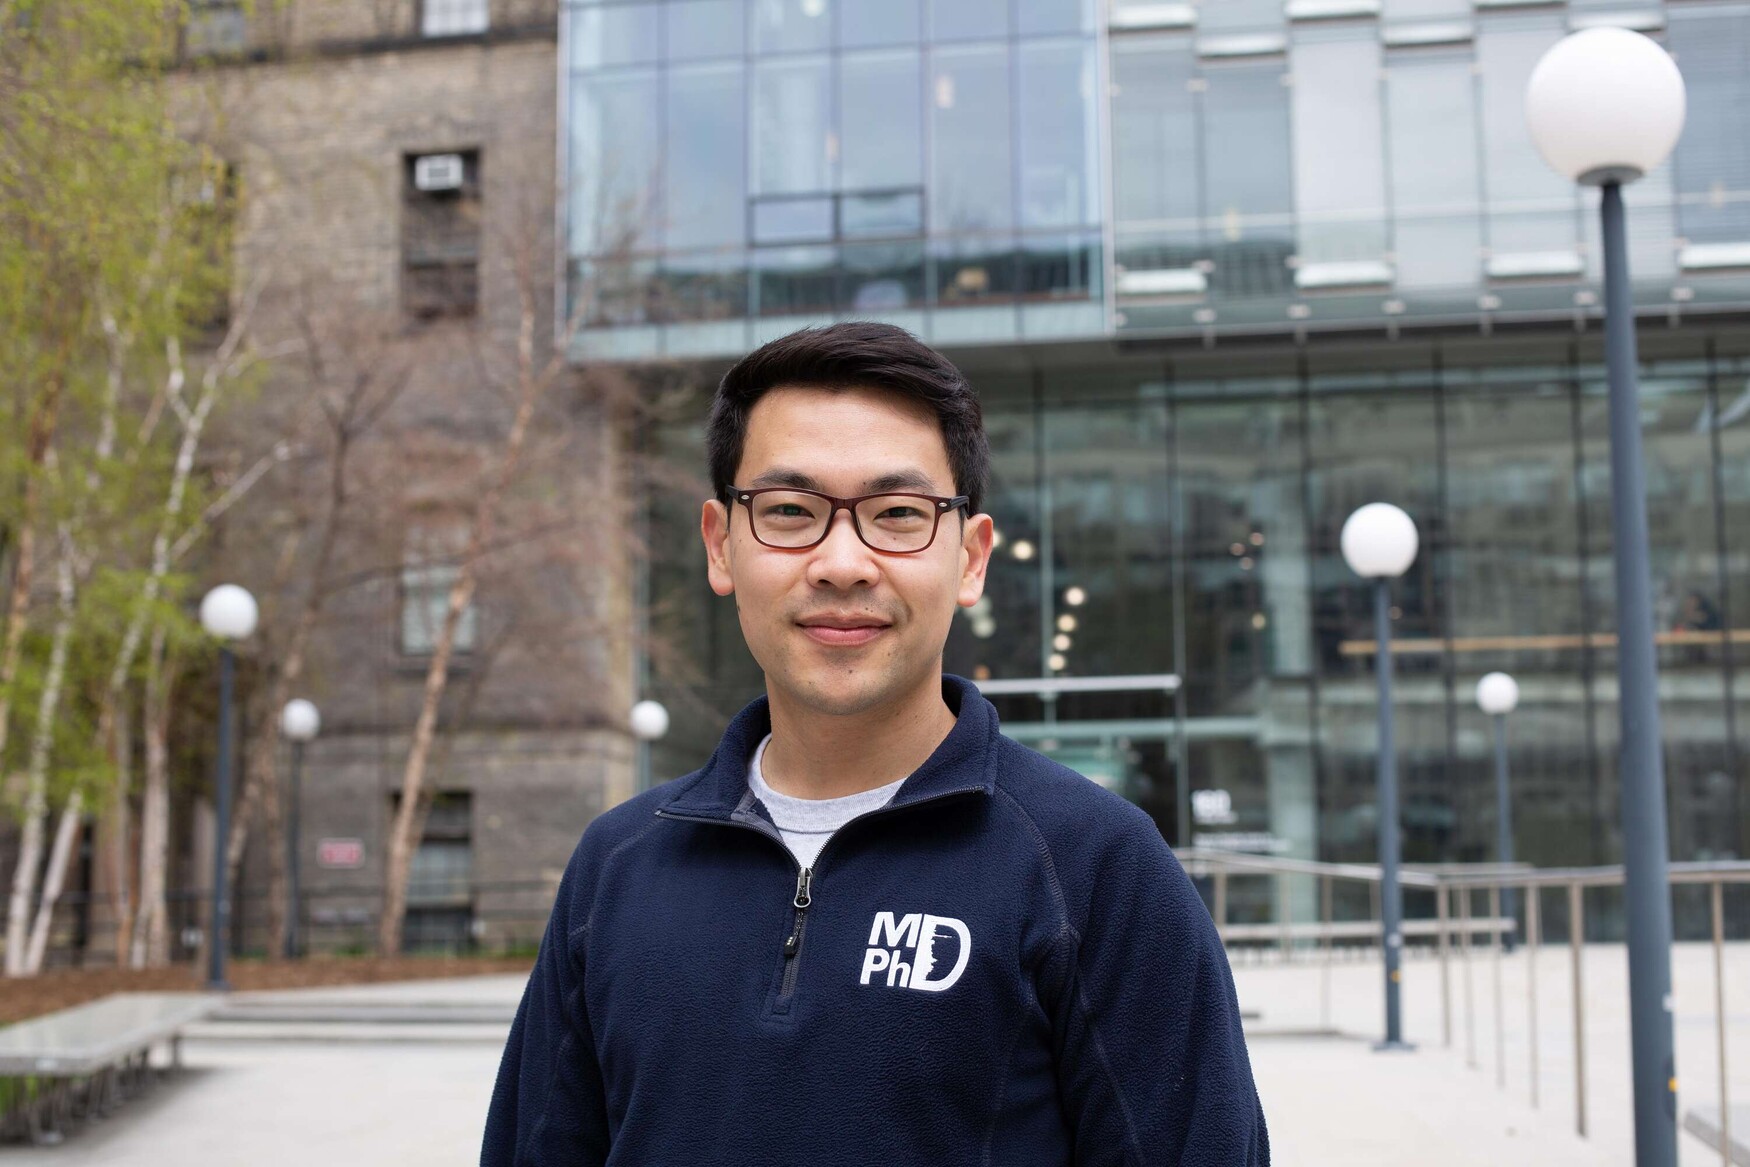 Alumnus Ben Ouyang wears a blue MD/PhD sweater and stands outside U of T's Donnelly Centre for Cellular and Biomolecular Research.